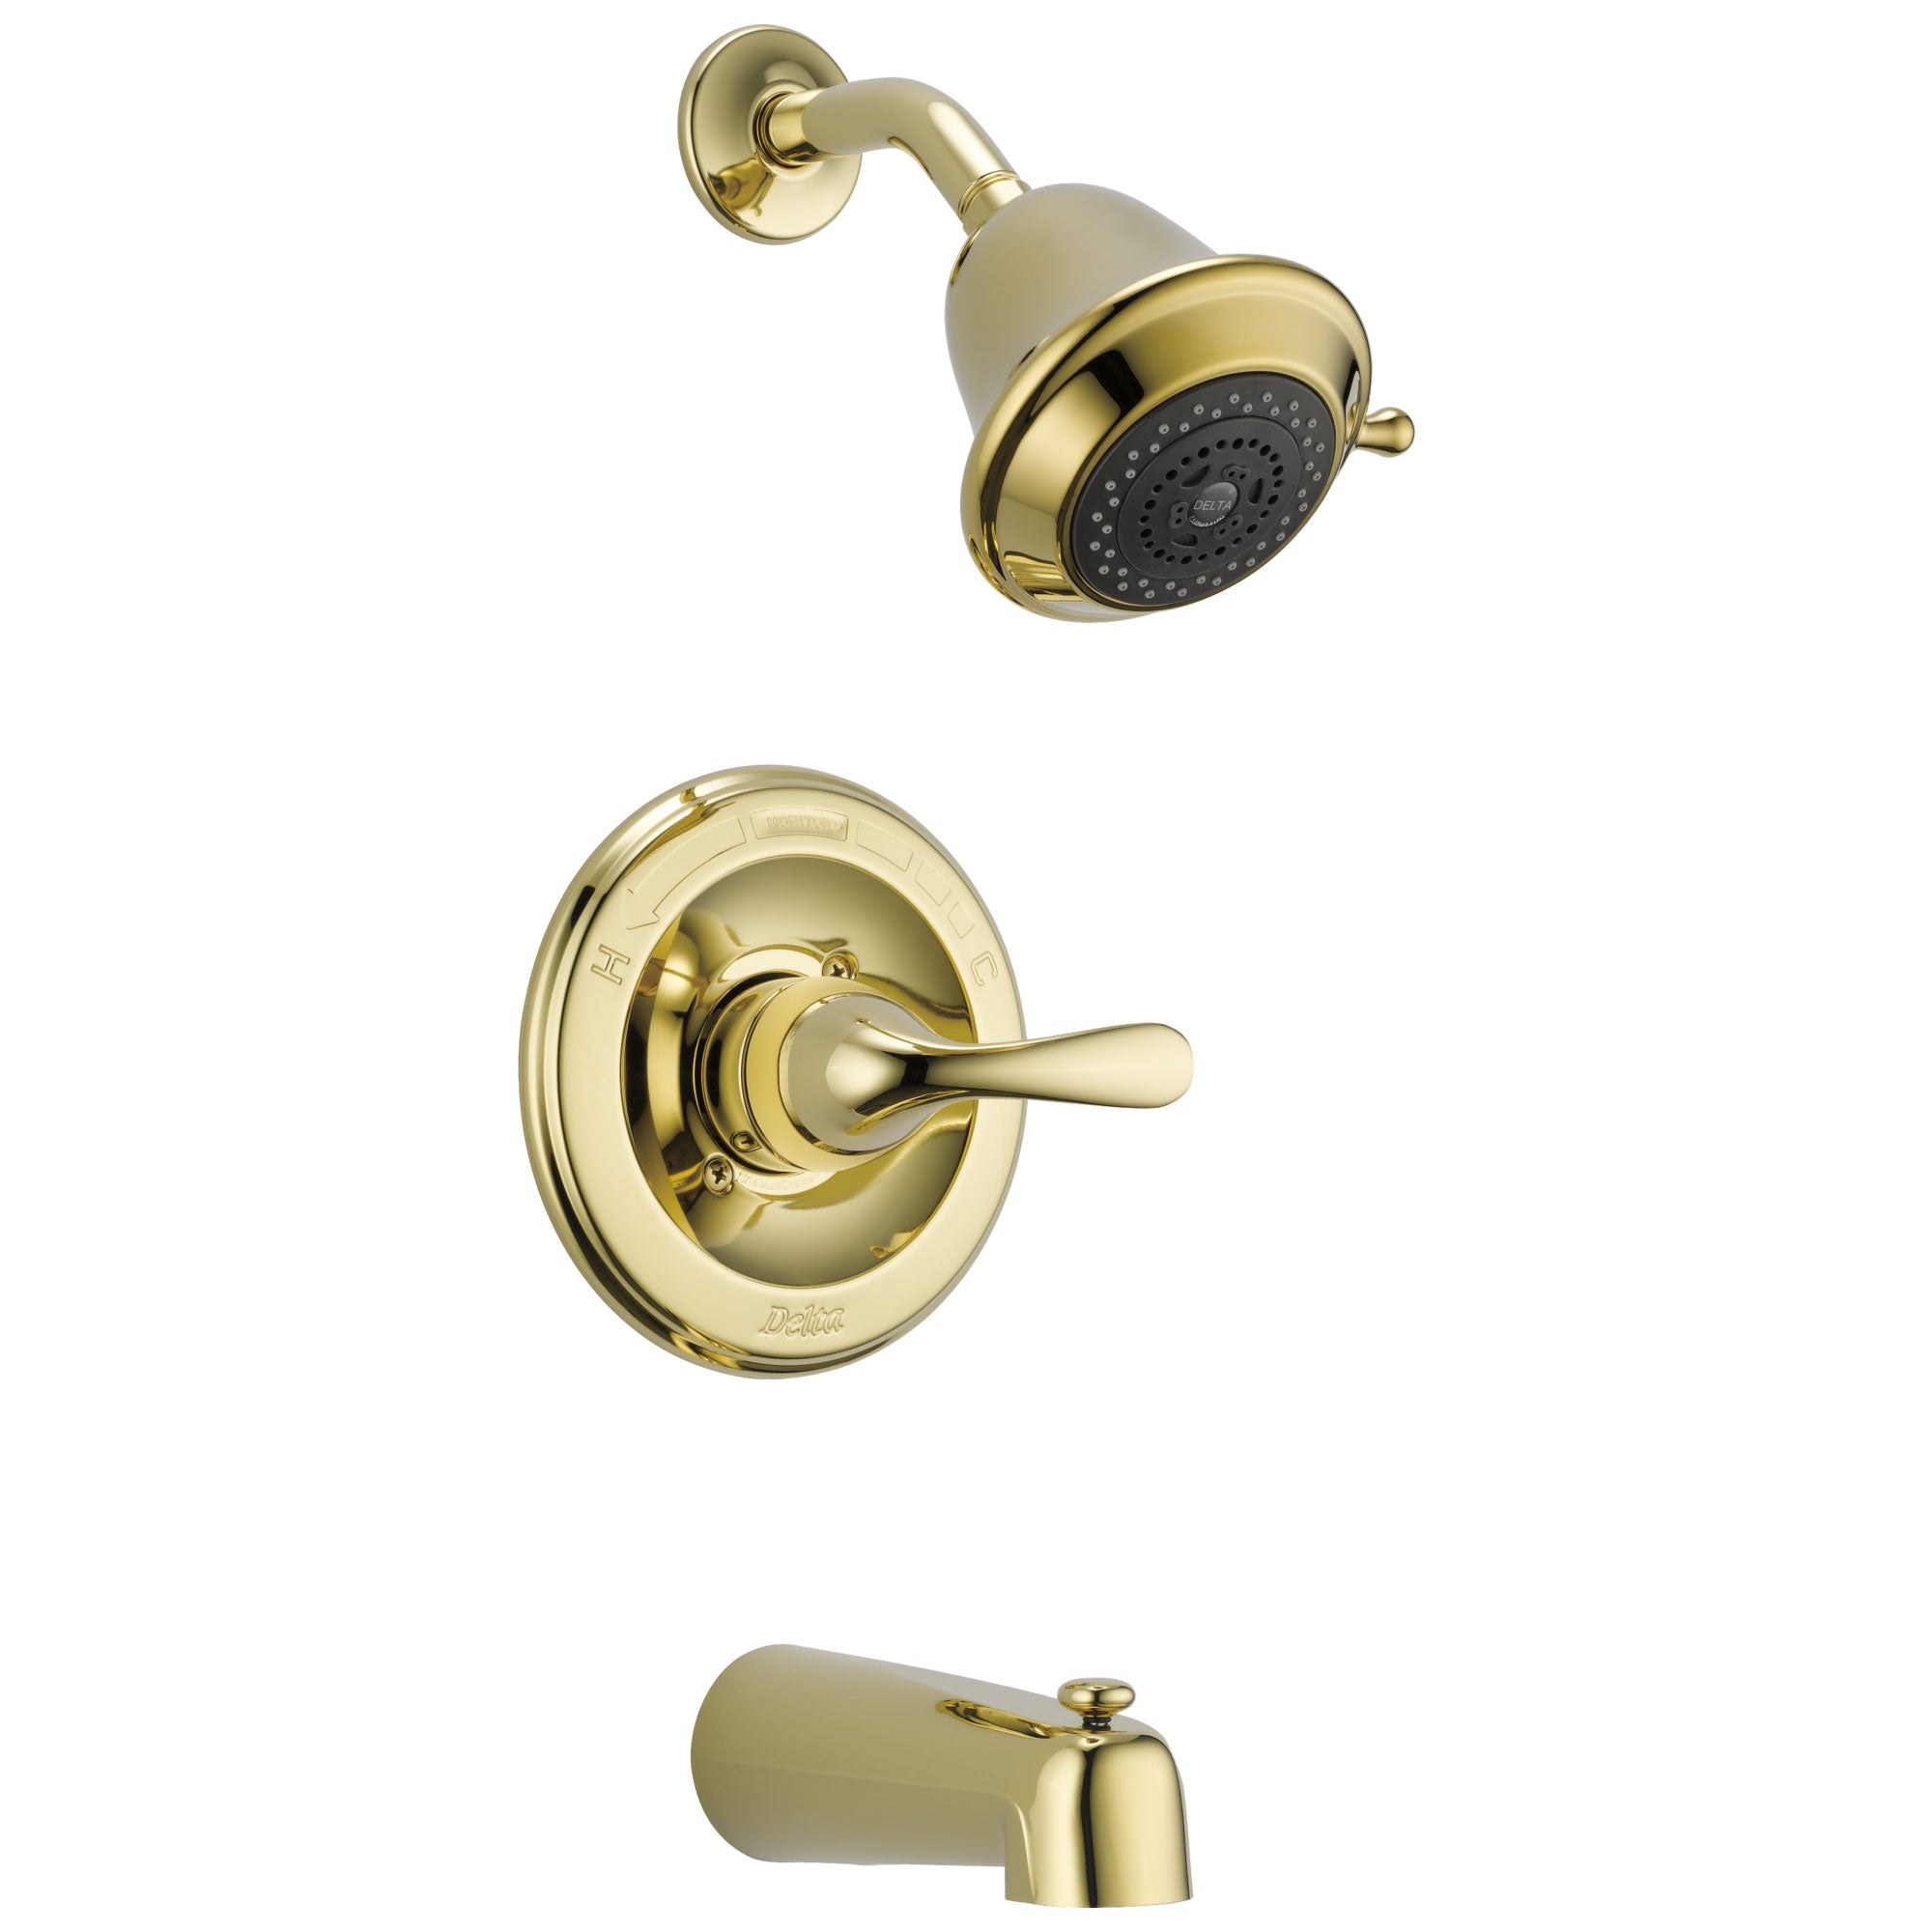 Delta Polished Brass Finish Monitor 13 Series 1 Handle Pressure Balanced Tub & Shower Combination Faucet Trim (Valve Sold Separately) DT13420PBSHCCER